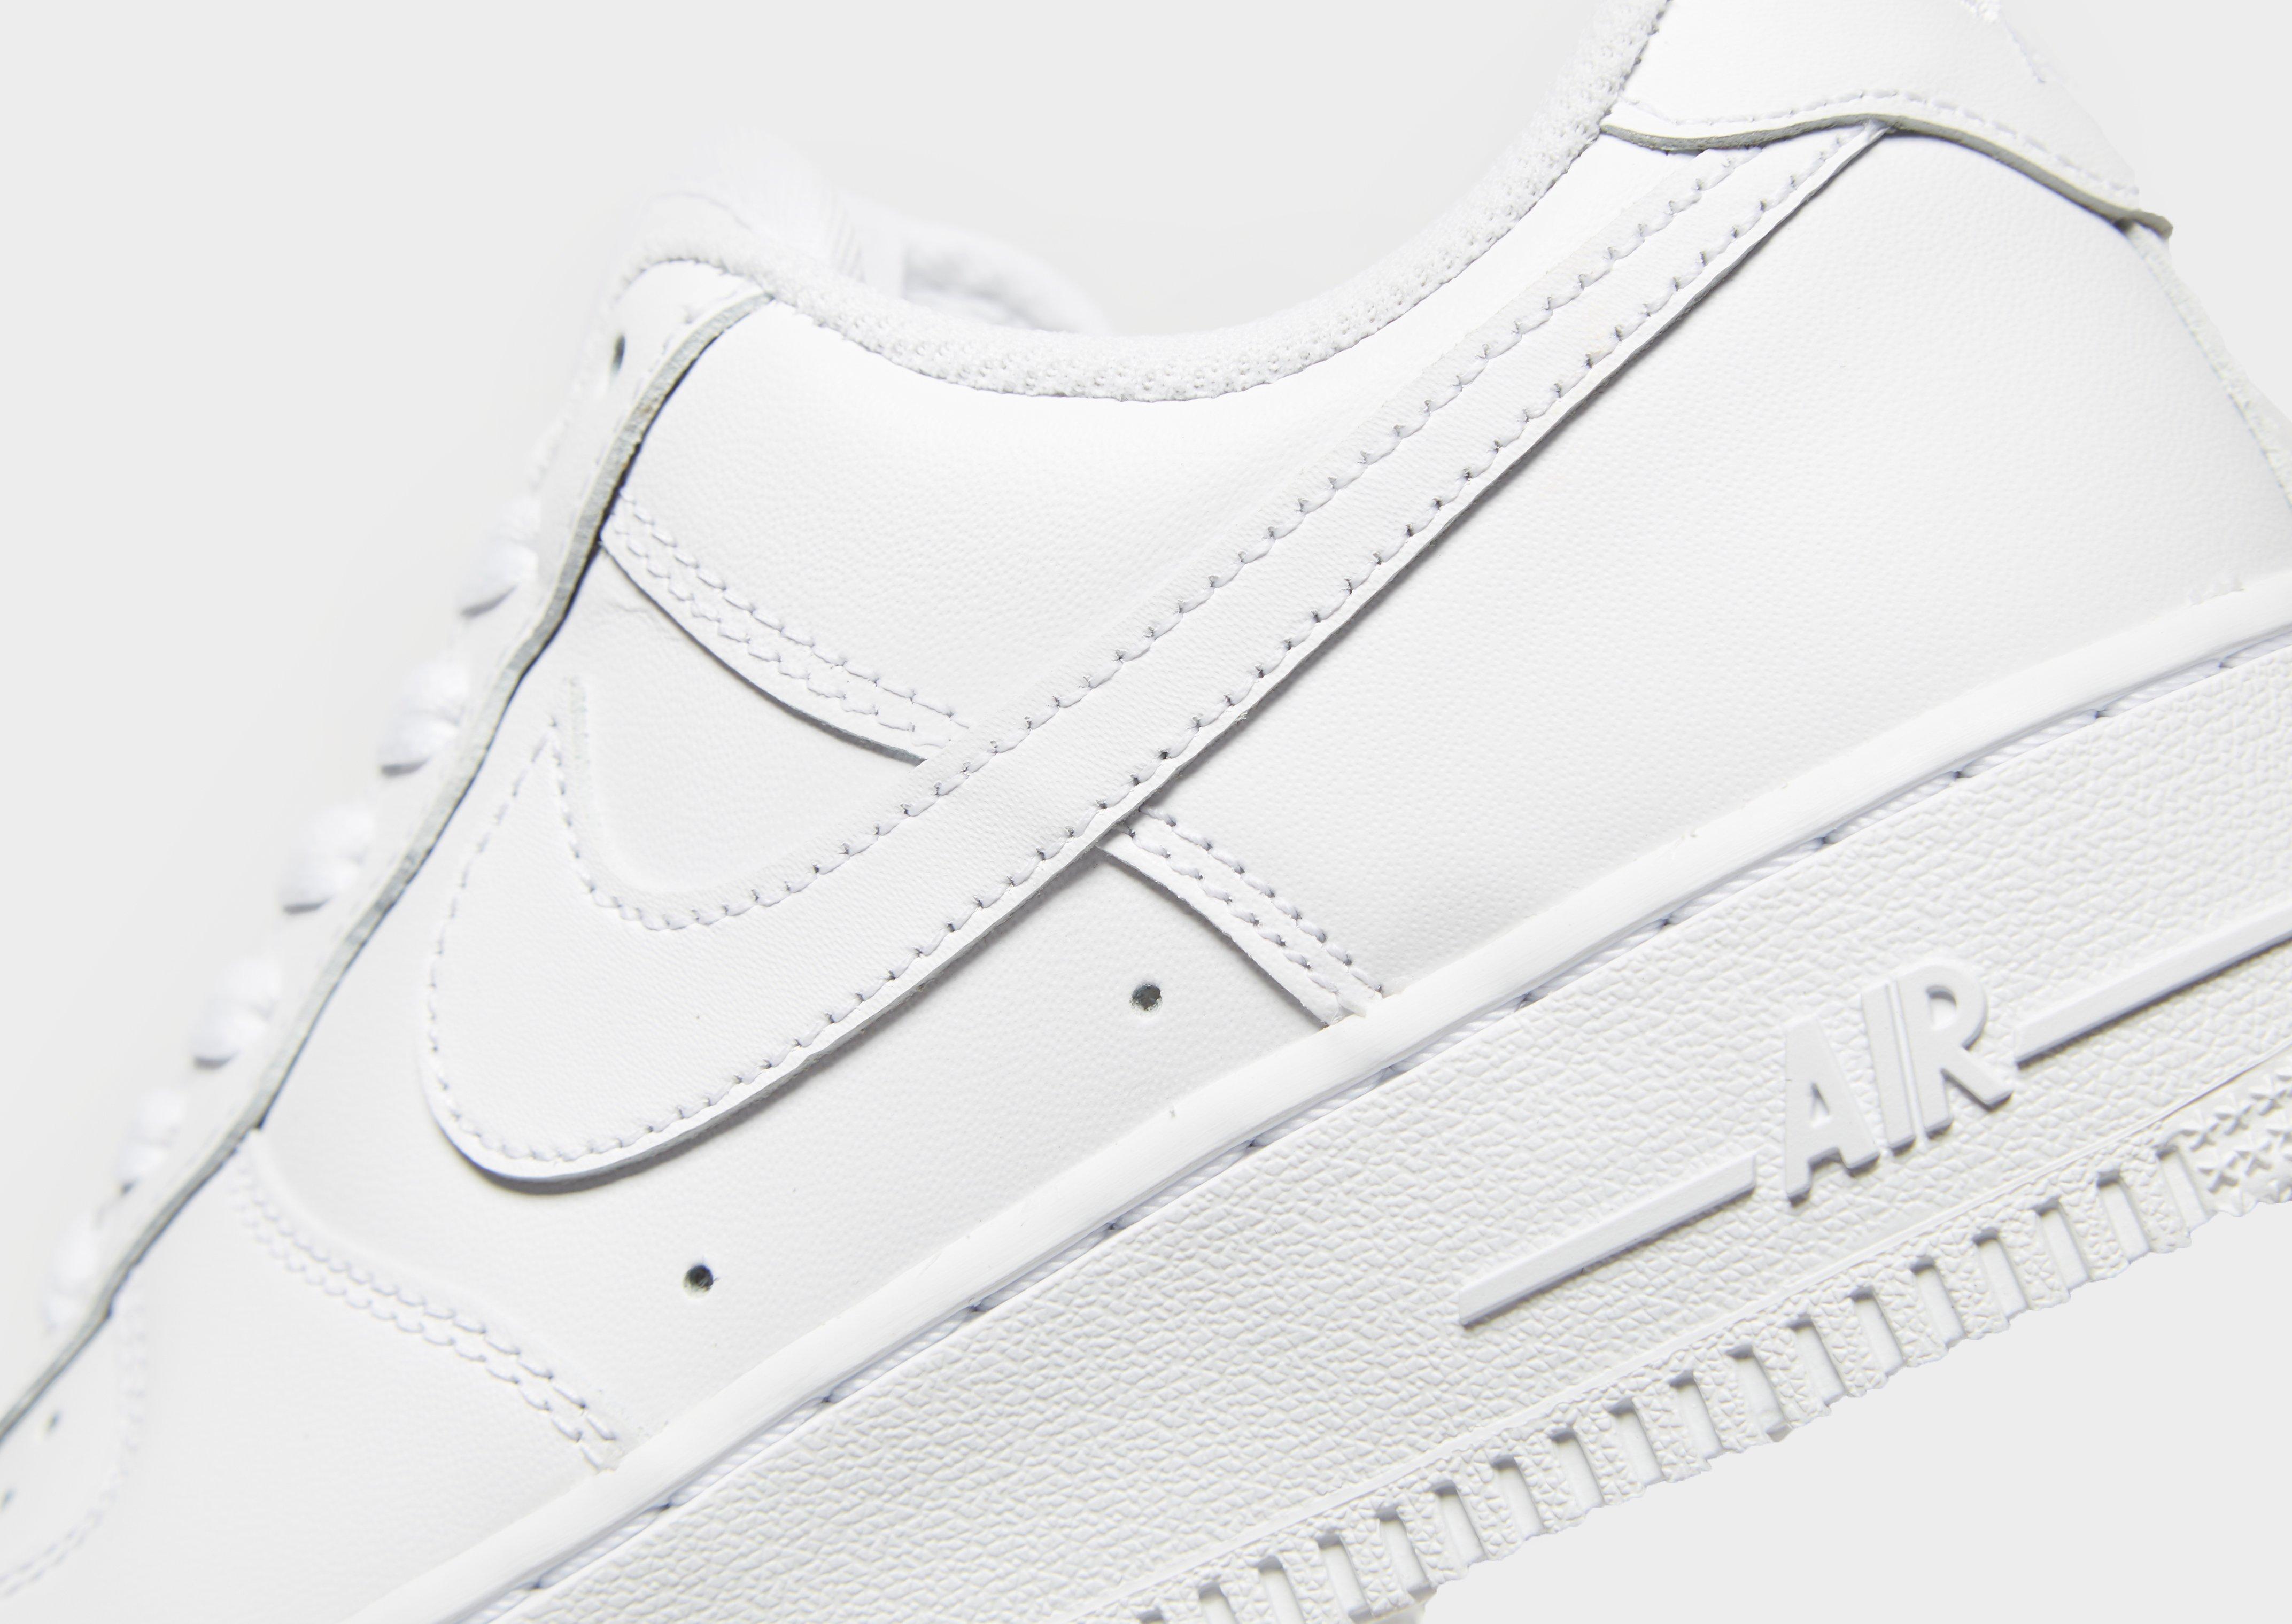 nike air force 1 low white womens size 7